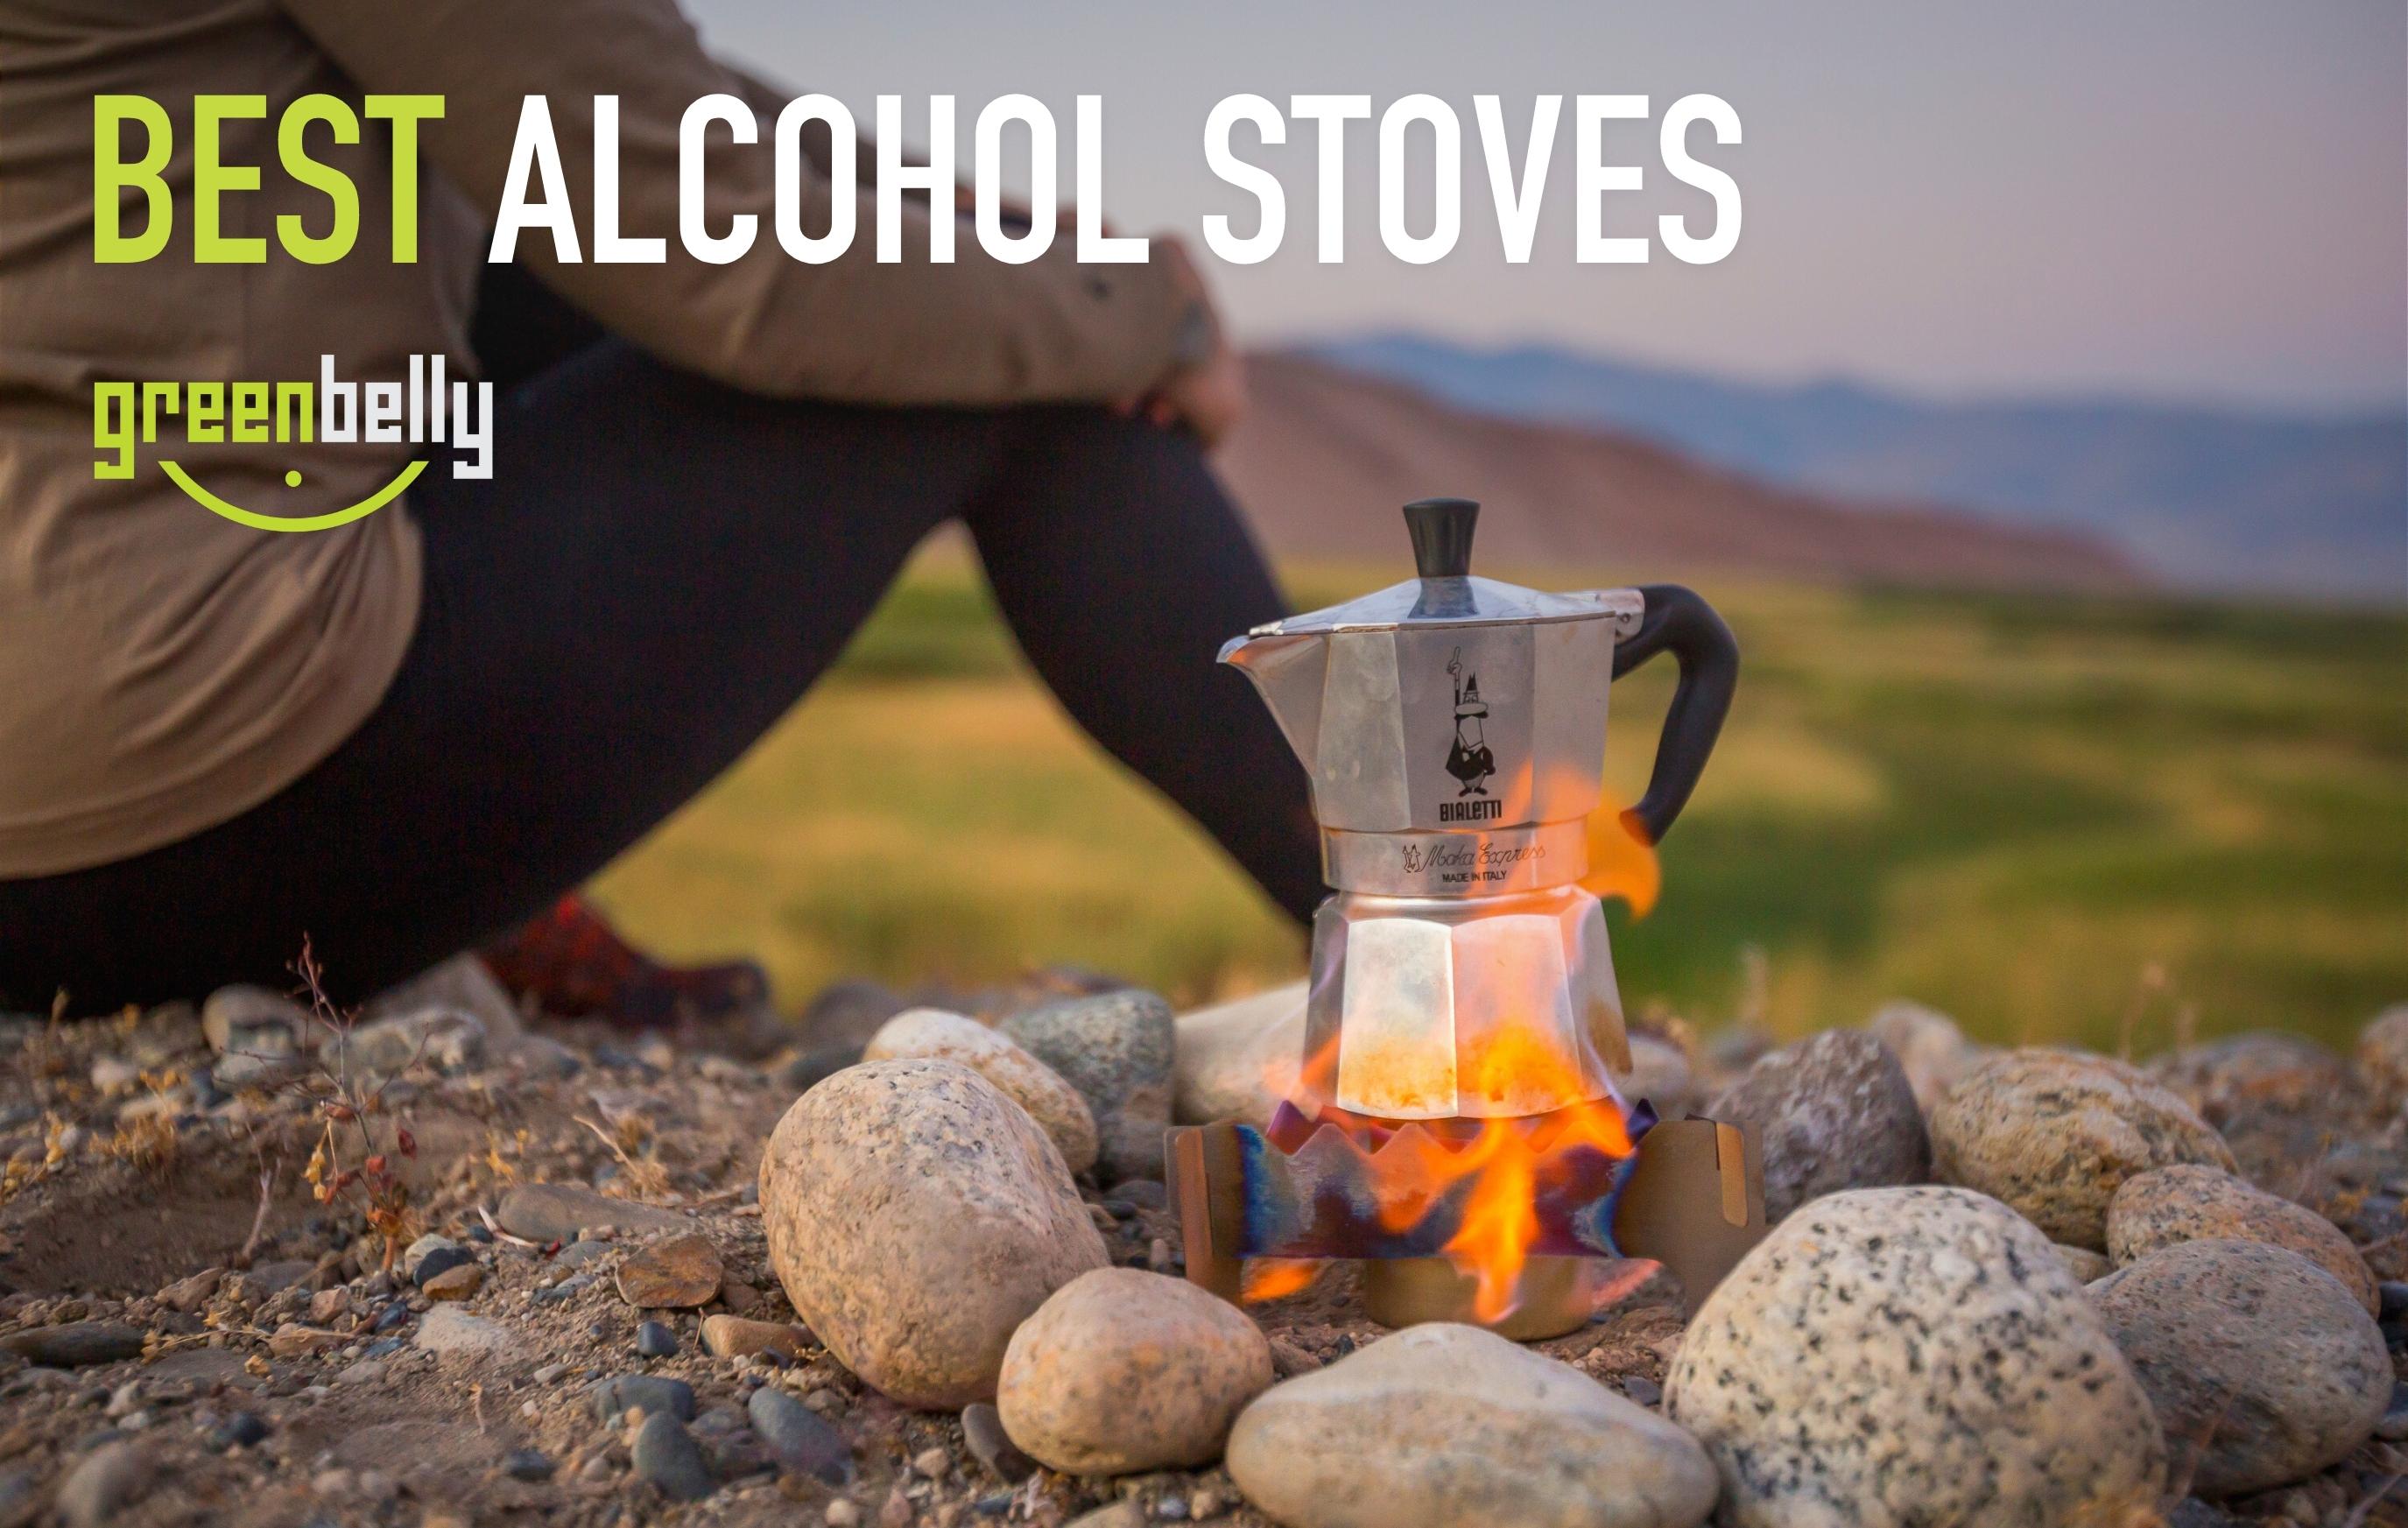 https://cdn.shopify.com/s/files/1/0384/0233/files/alcohol-stoves-featured.jpg?v=1658773229